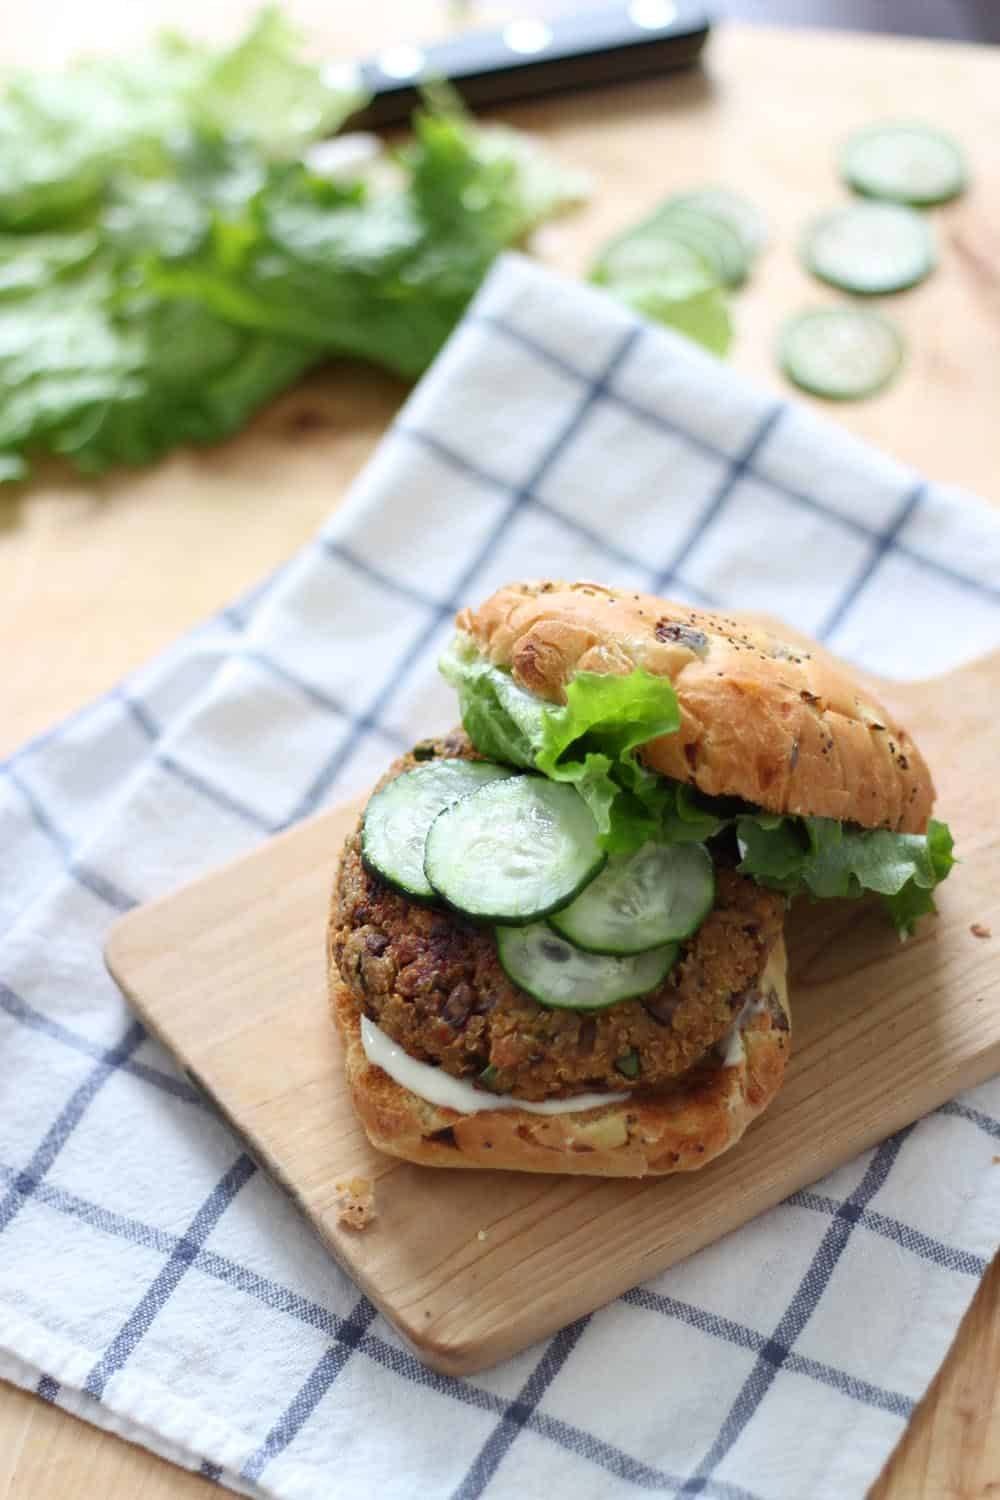 Veggie burger with the top bun pushed aside to show toppings, on a wooden cutting board, on a blue and white checkered cloth.